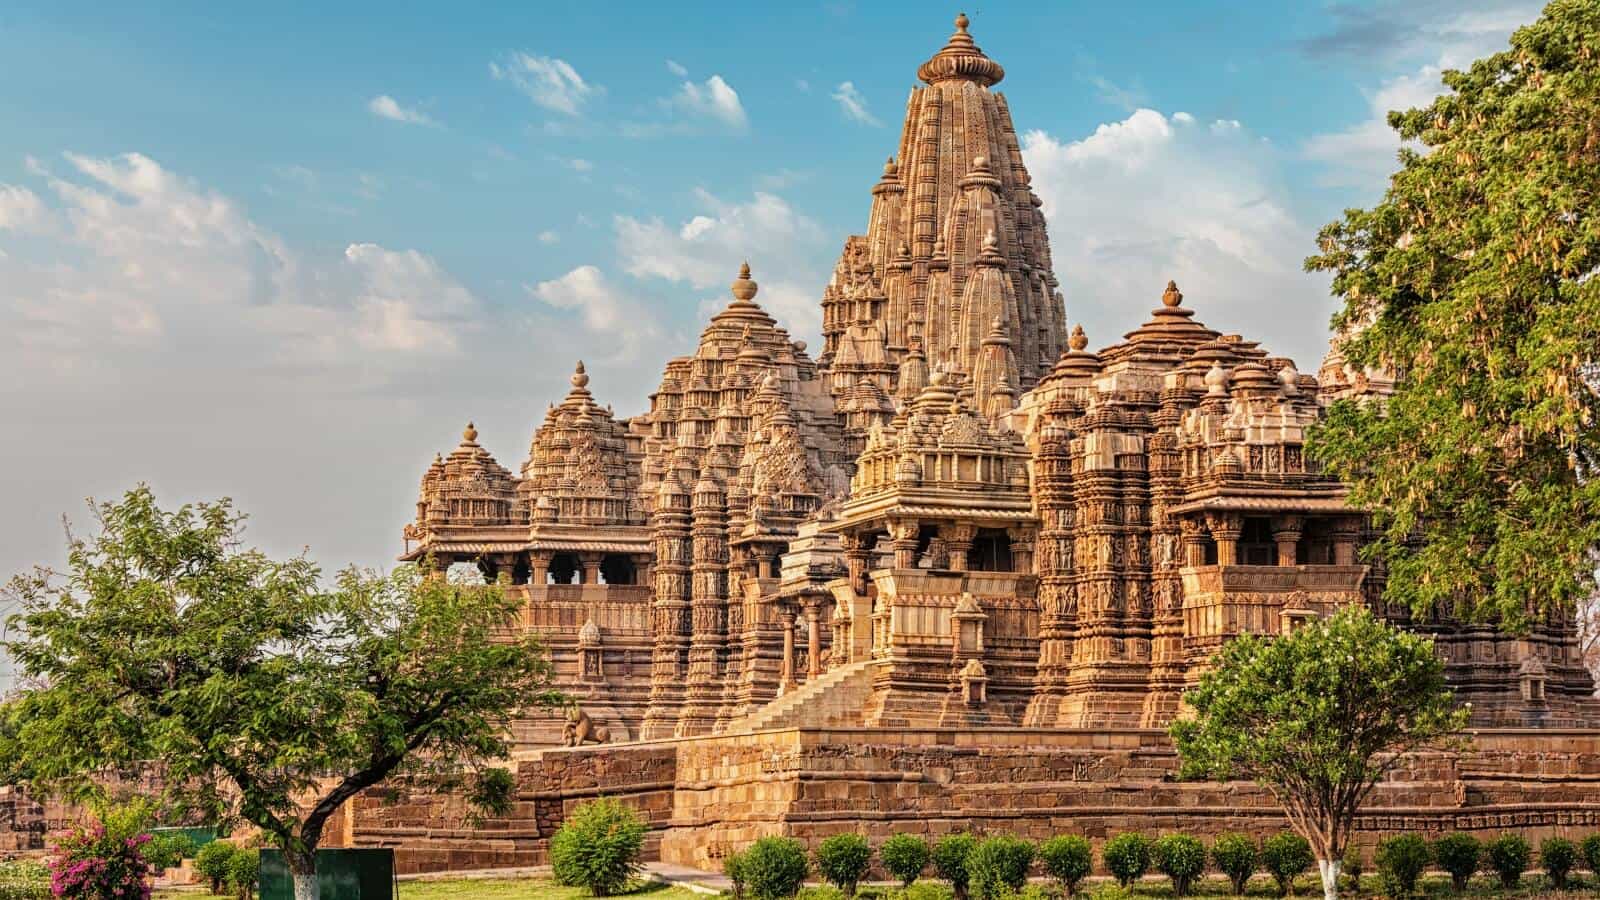 madhya pradesh Tour Packages. Beyond Travel Solutions